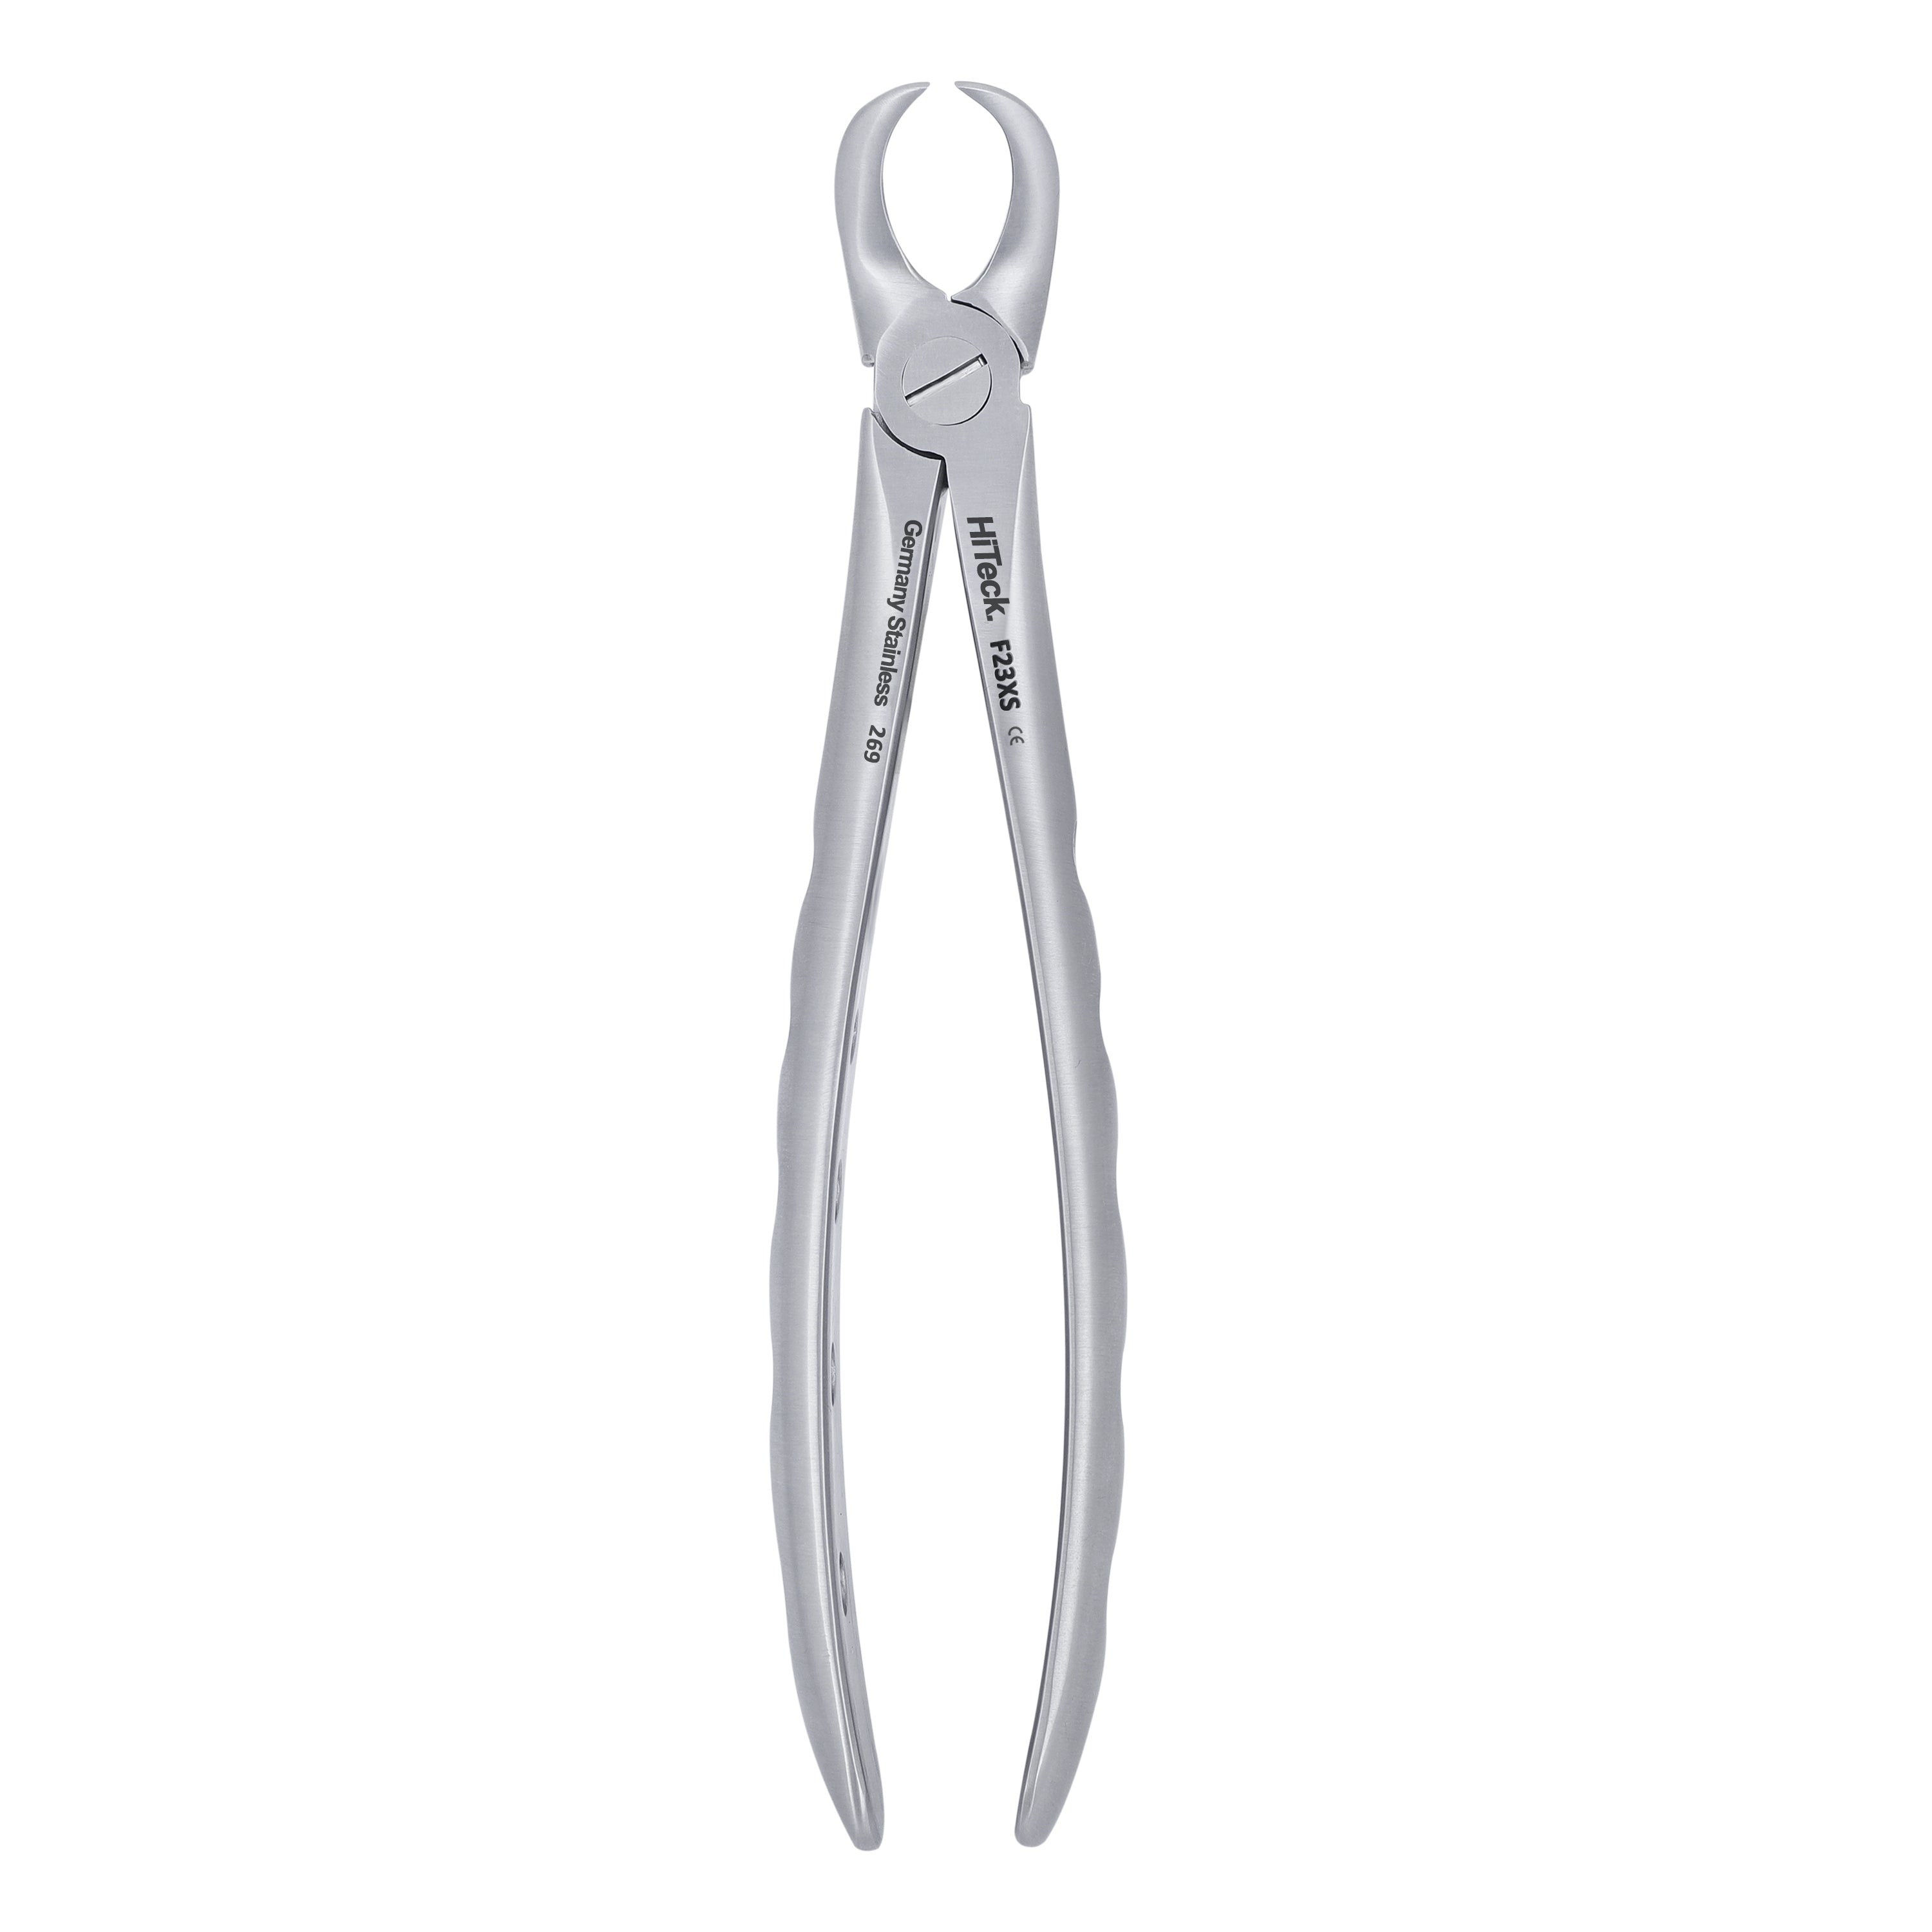 23 Cowhorn Lower Molars Atraumair Extraction Forceps - HiTeck Medical Instruments